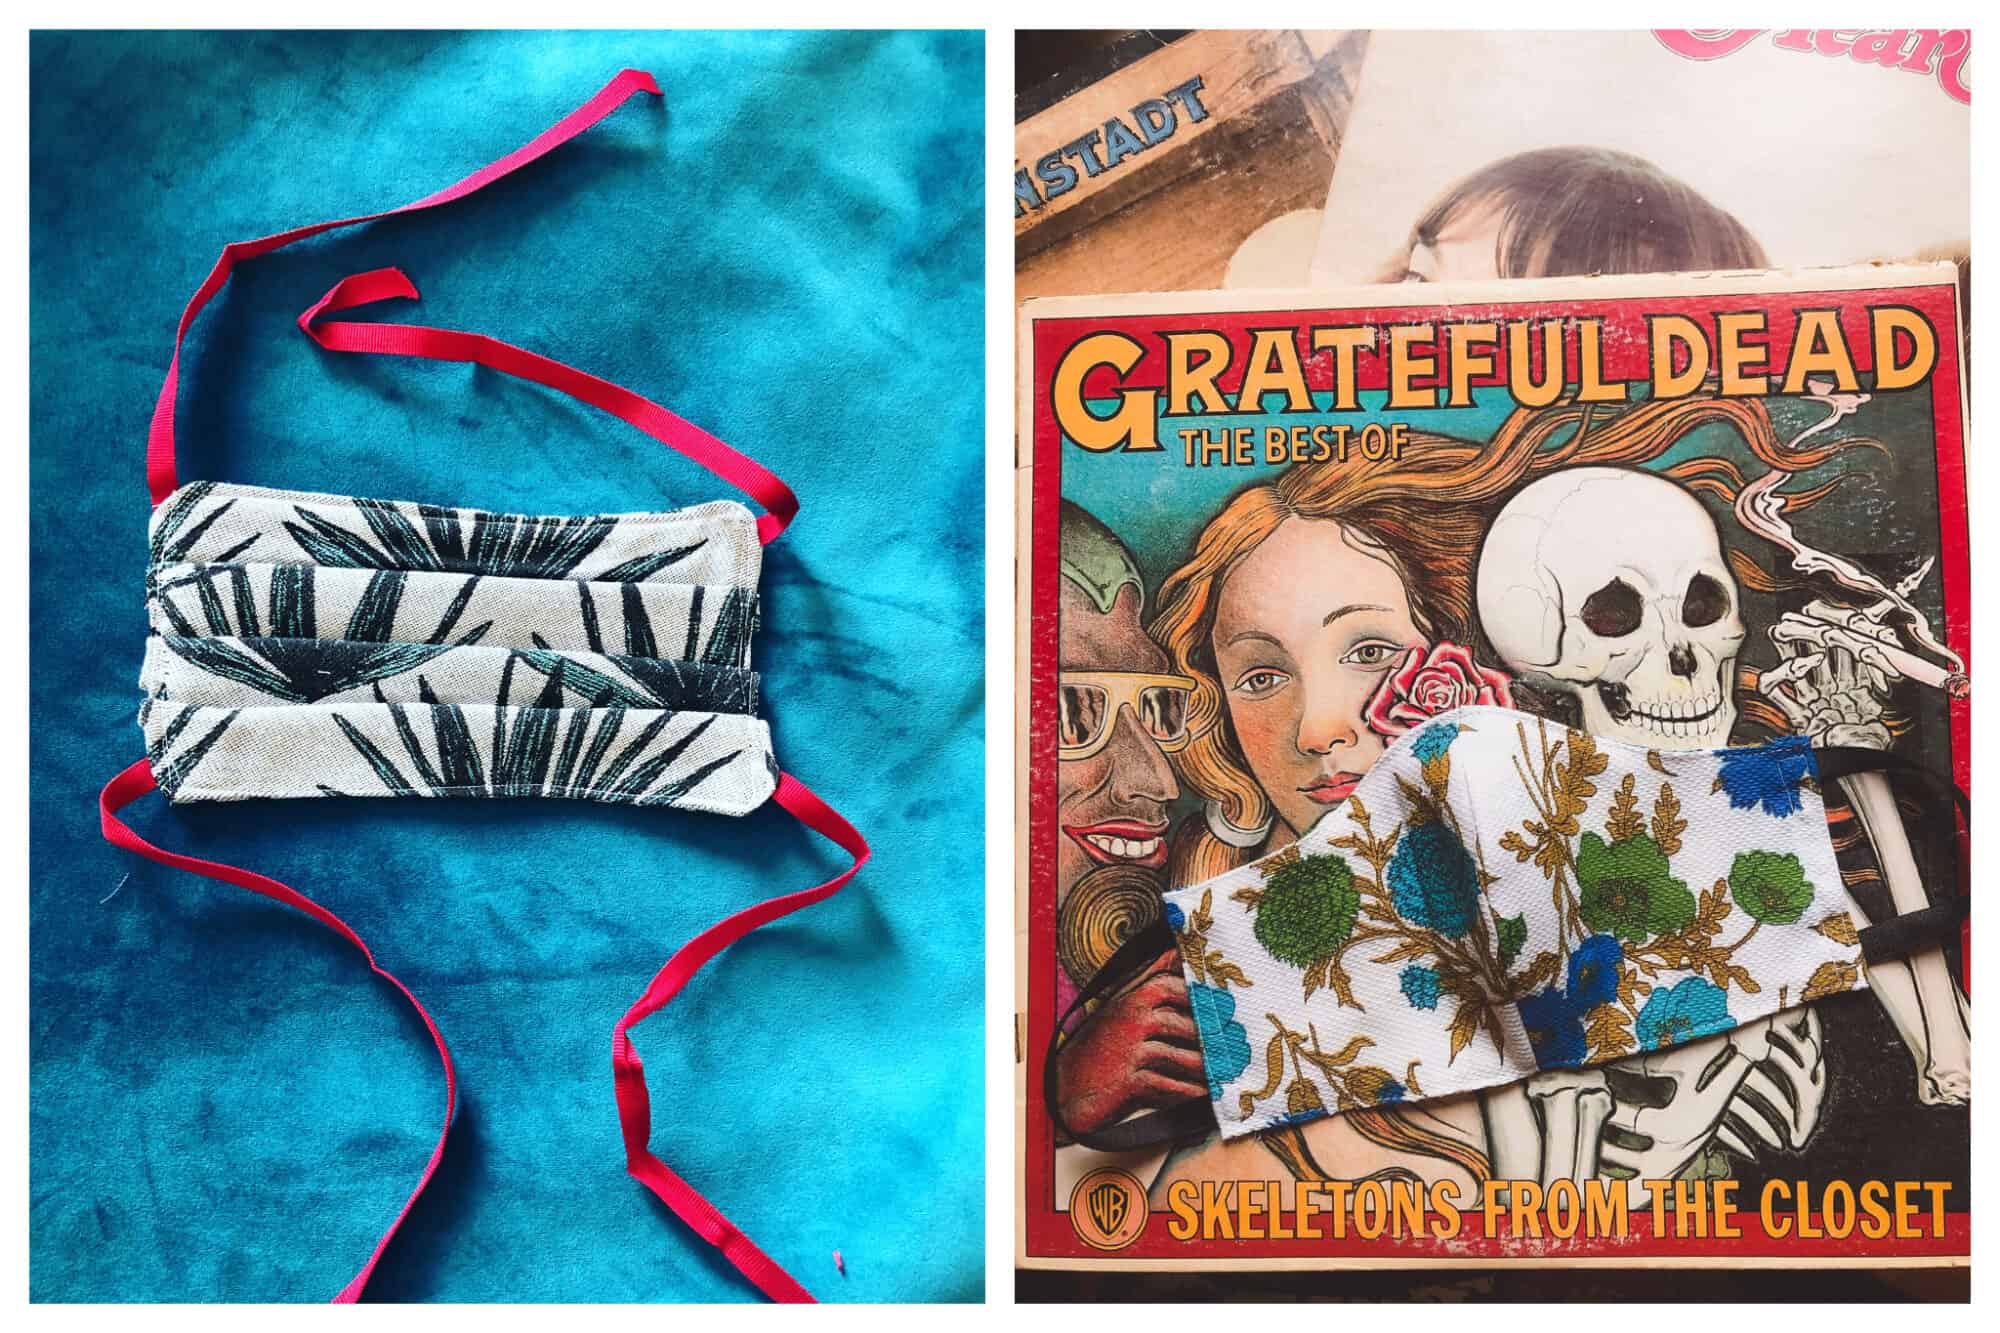 Left: a white and green face mask with a plant motif and with red straps on a blue velvet background.
Right: a white blue and green face mask sitting on an old record, Skeletons from the Closet: The Best of Grateful Dead.